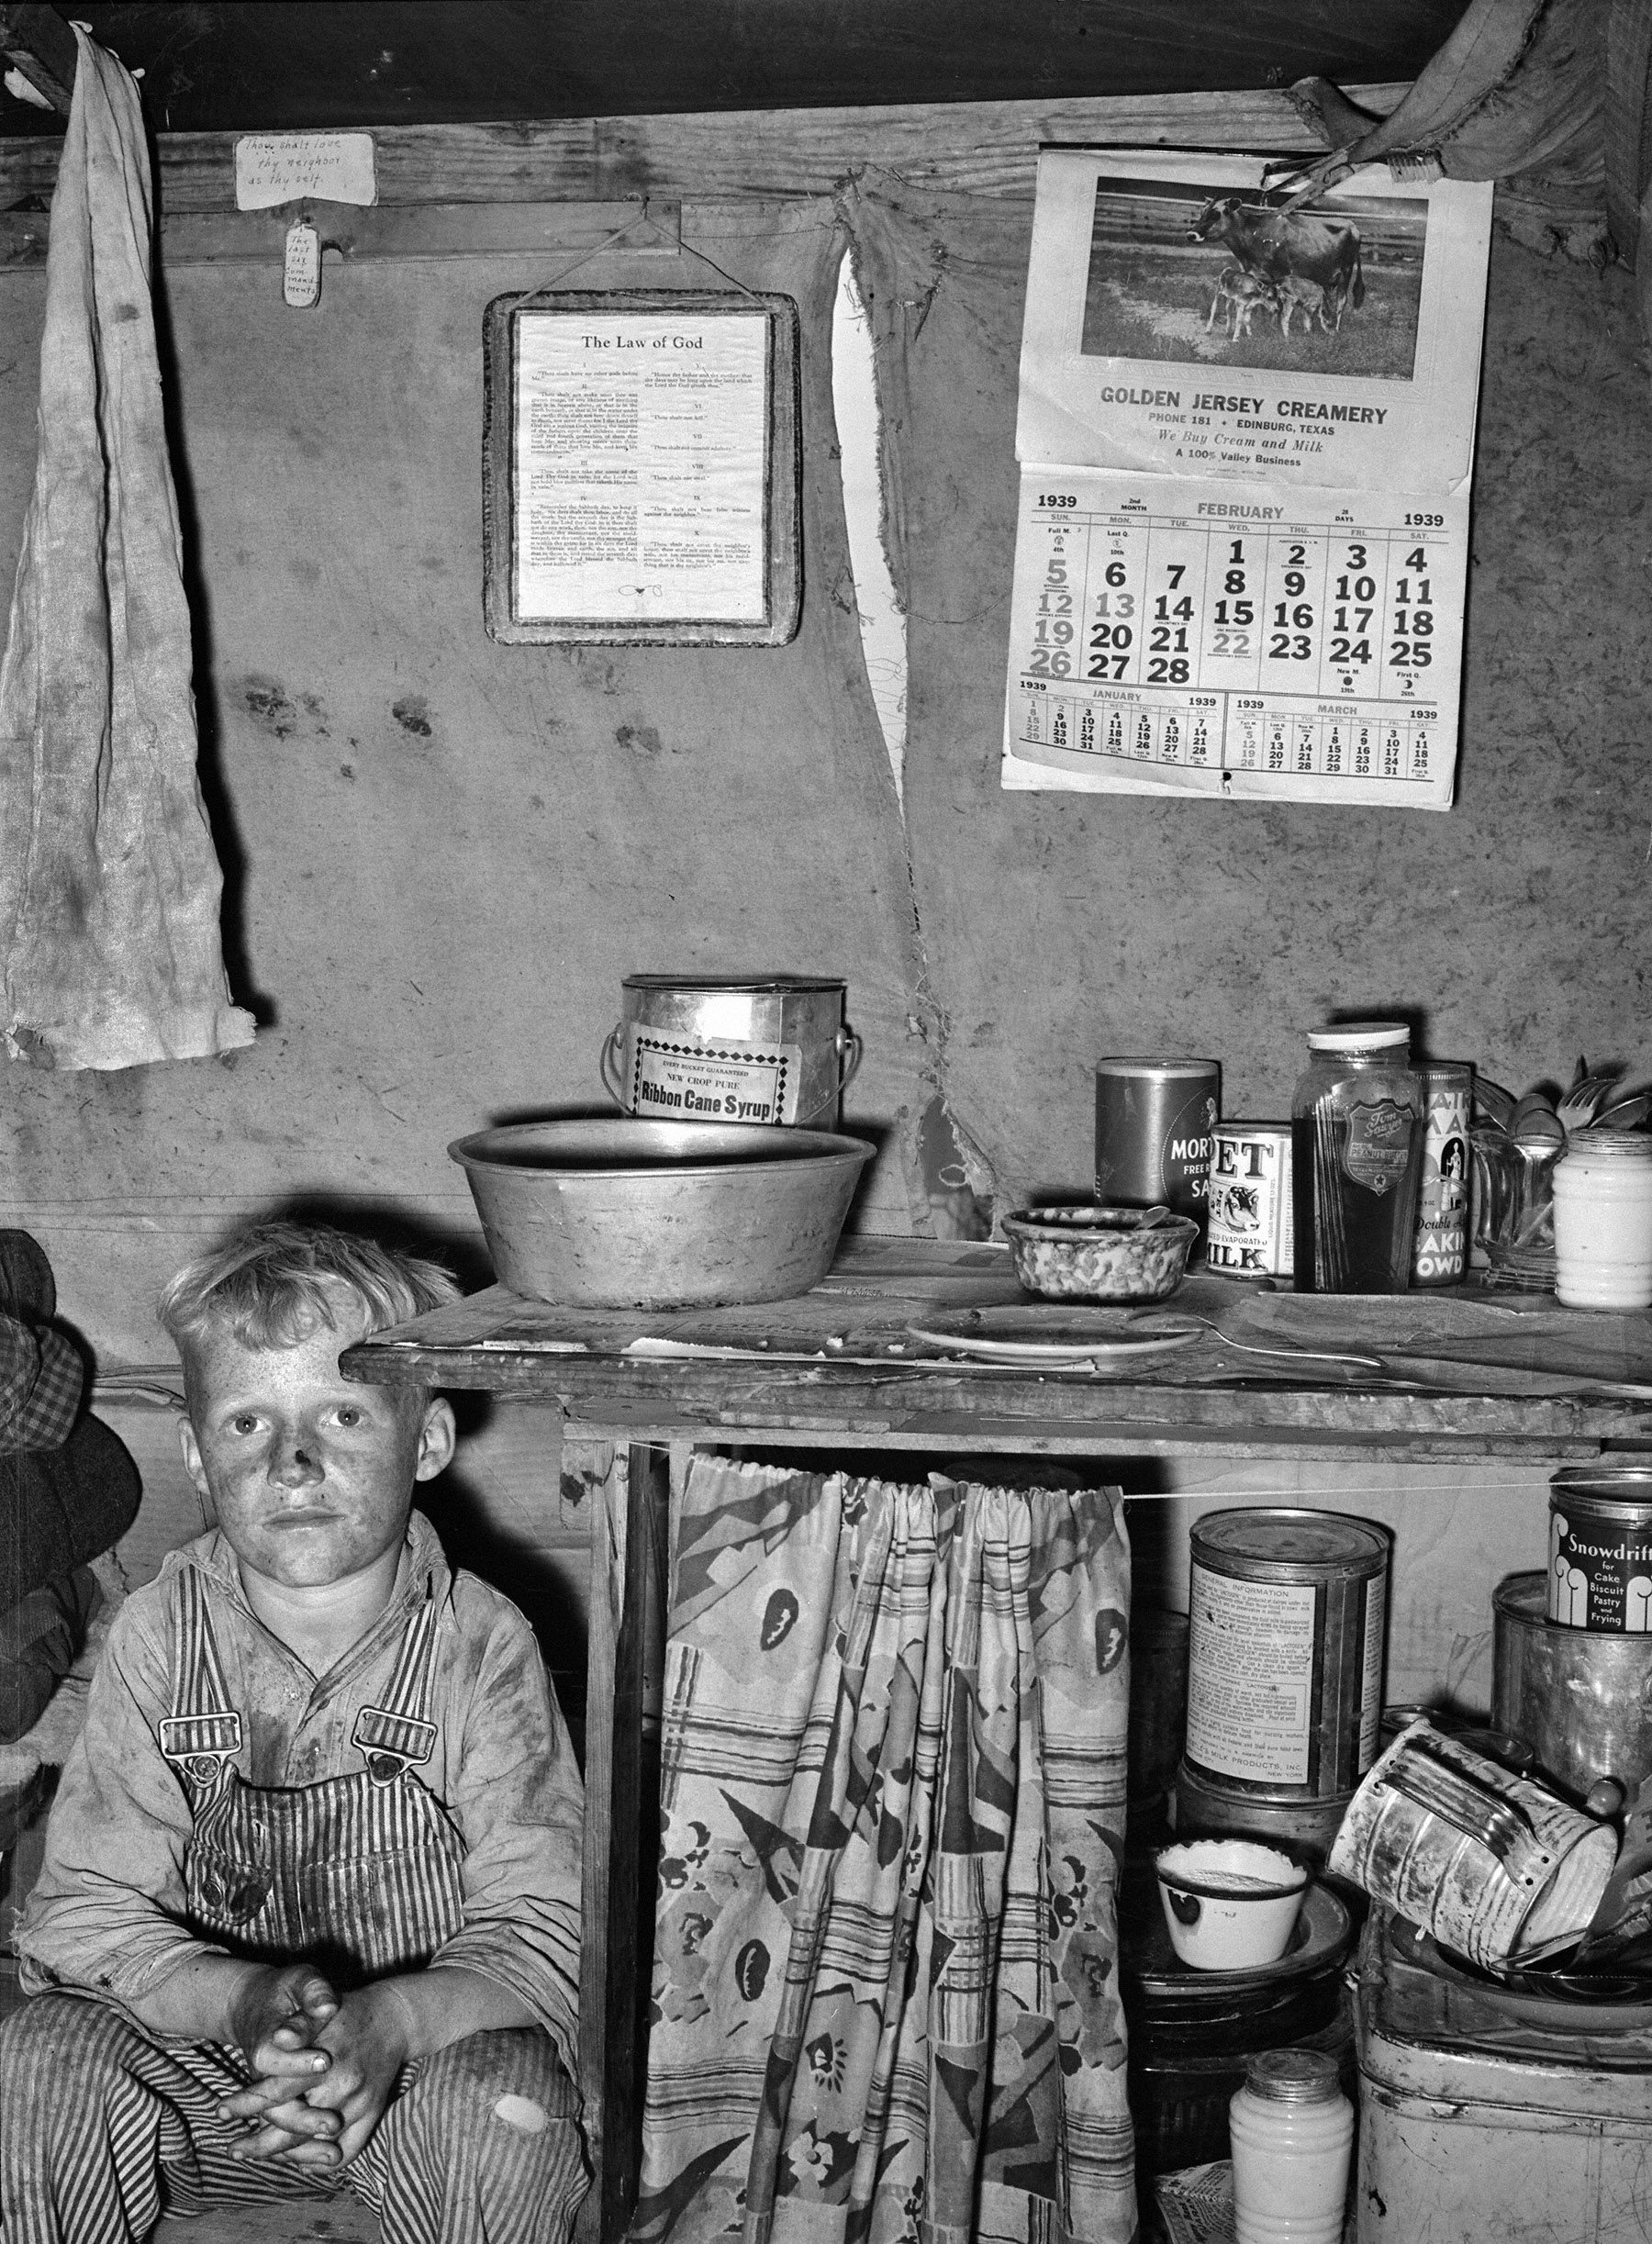 February 1939. "Child of migrant sitting by kitchen cabinet in tent home near Edinburg, Texas." Ten Commandments, meet Jersey Creamery. Medium-format negative by Russell Lee for the Resettlement Administration. View full size.